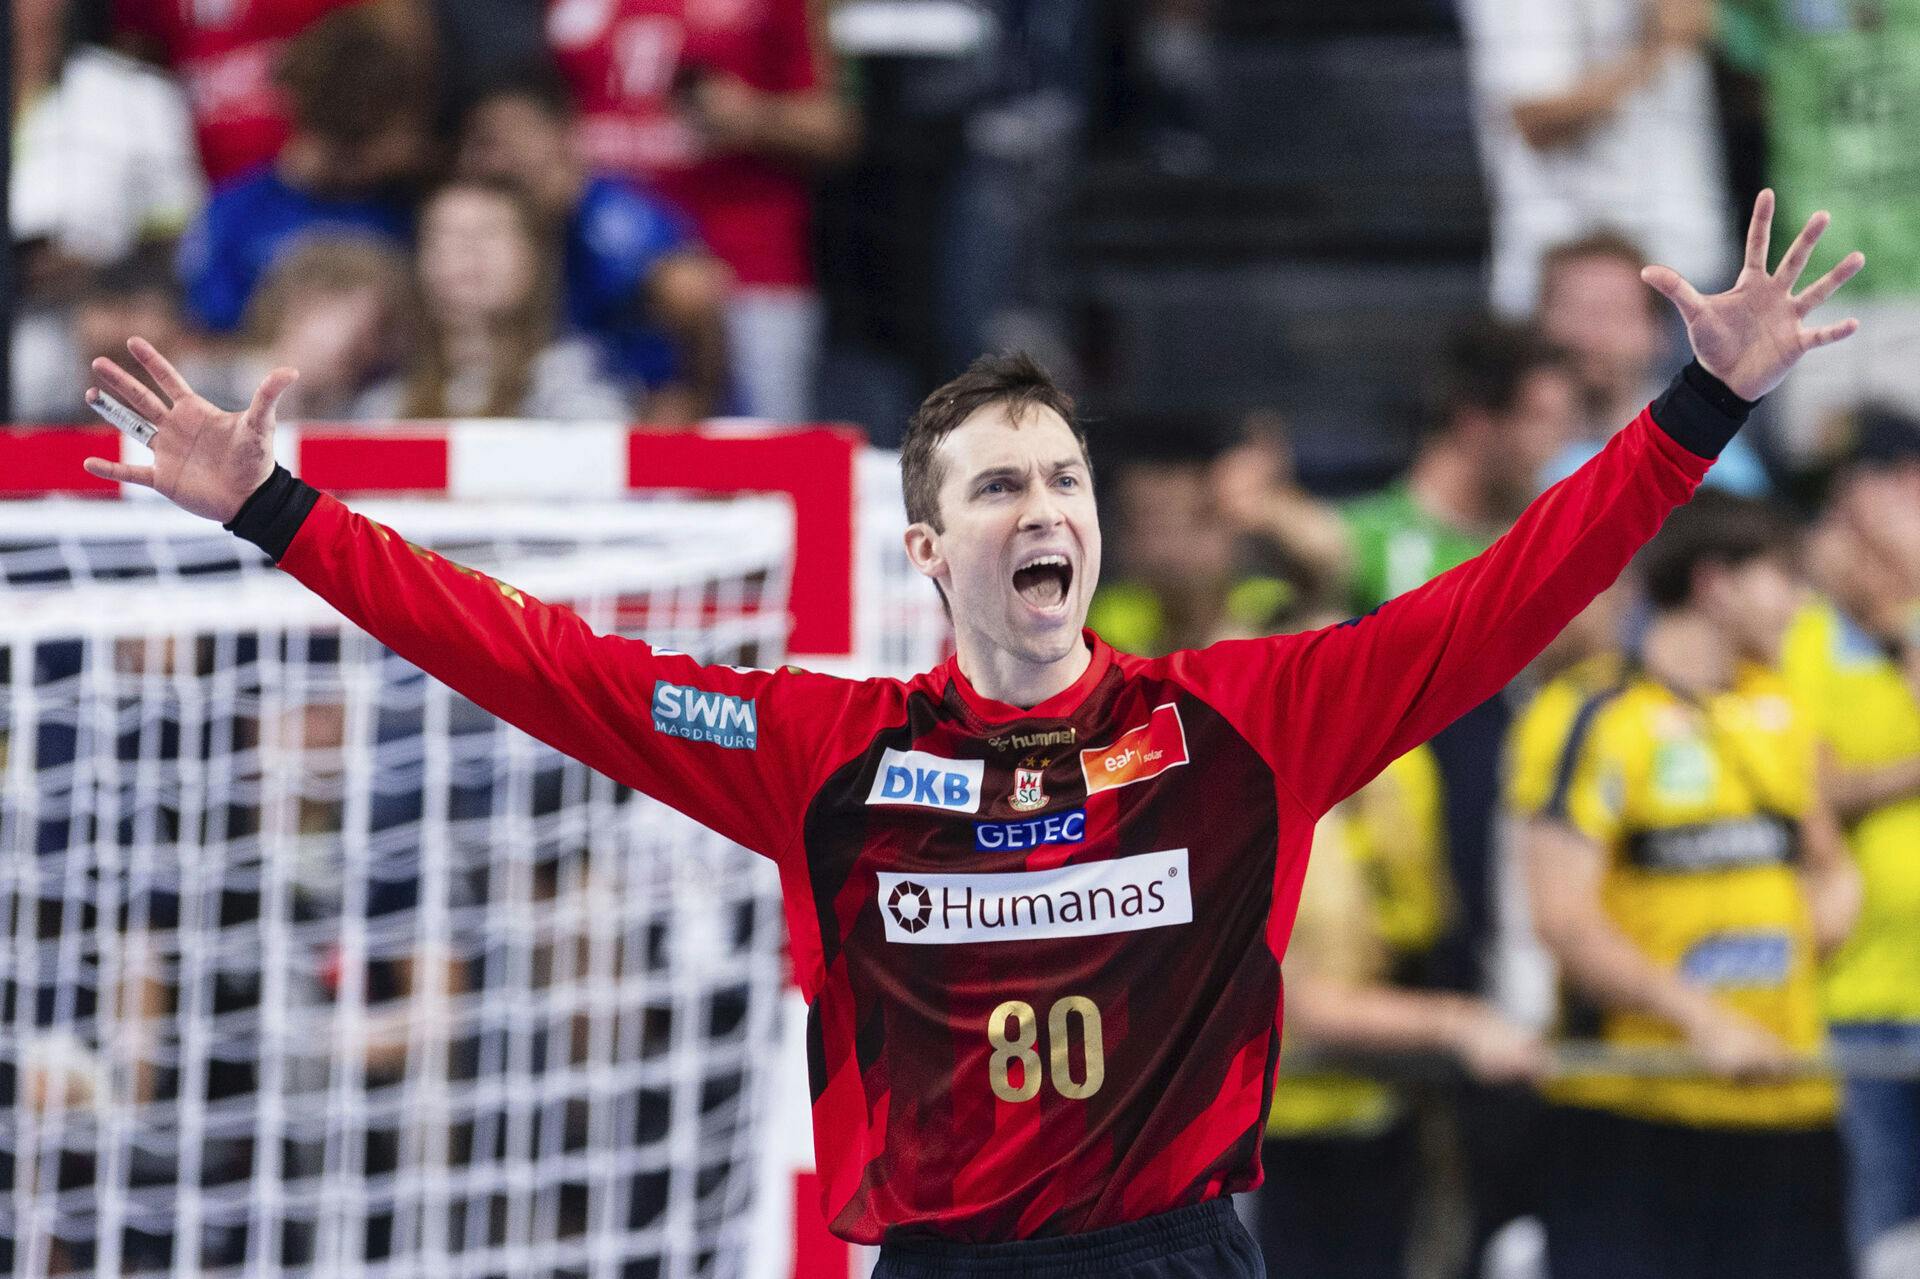 18 June 2023, North Rhine-Westphalia, Cologne: Handball: Champions League, SC Magdeburg - KS Kielce, Final Round, Final Four, Final, Lanxess Arena. Magdeburg's Nikola Portner cheers after a save. Photo by: Marius Becker/picture-alliance/dpa/AP Images